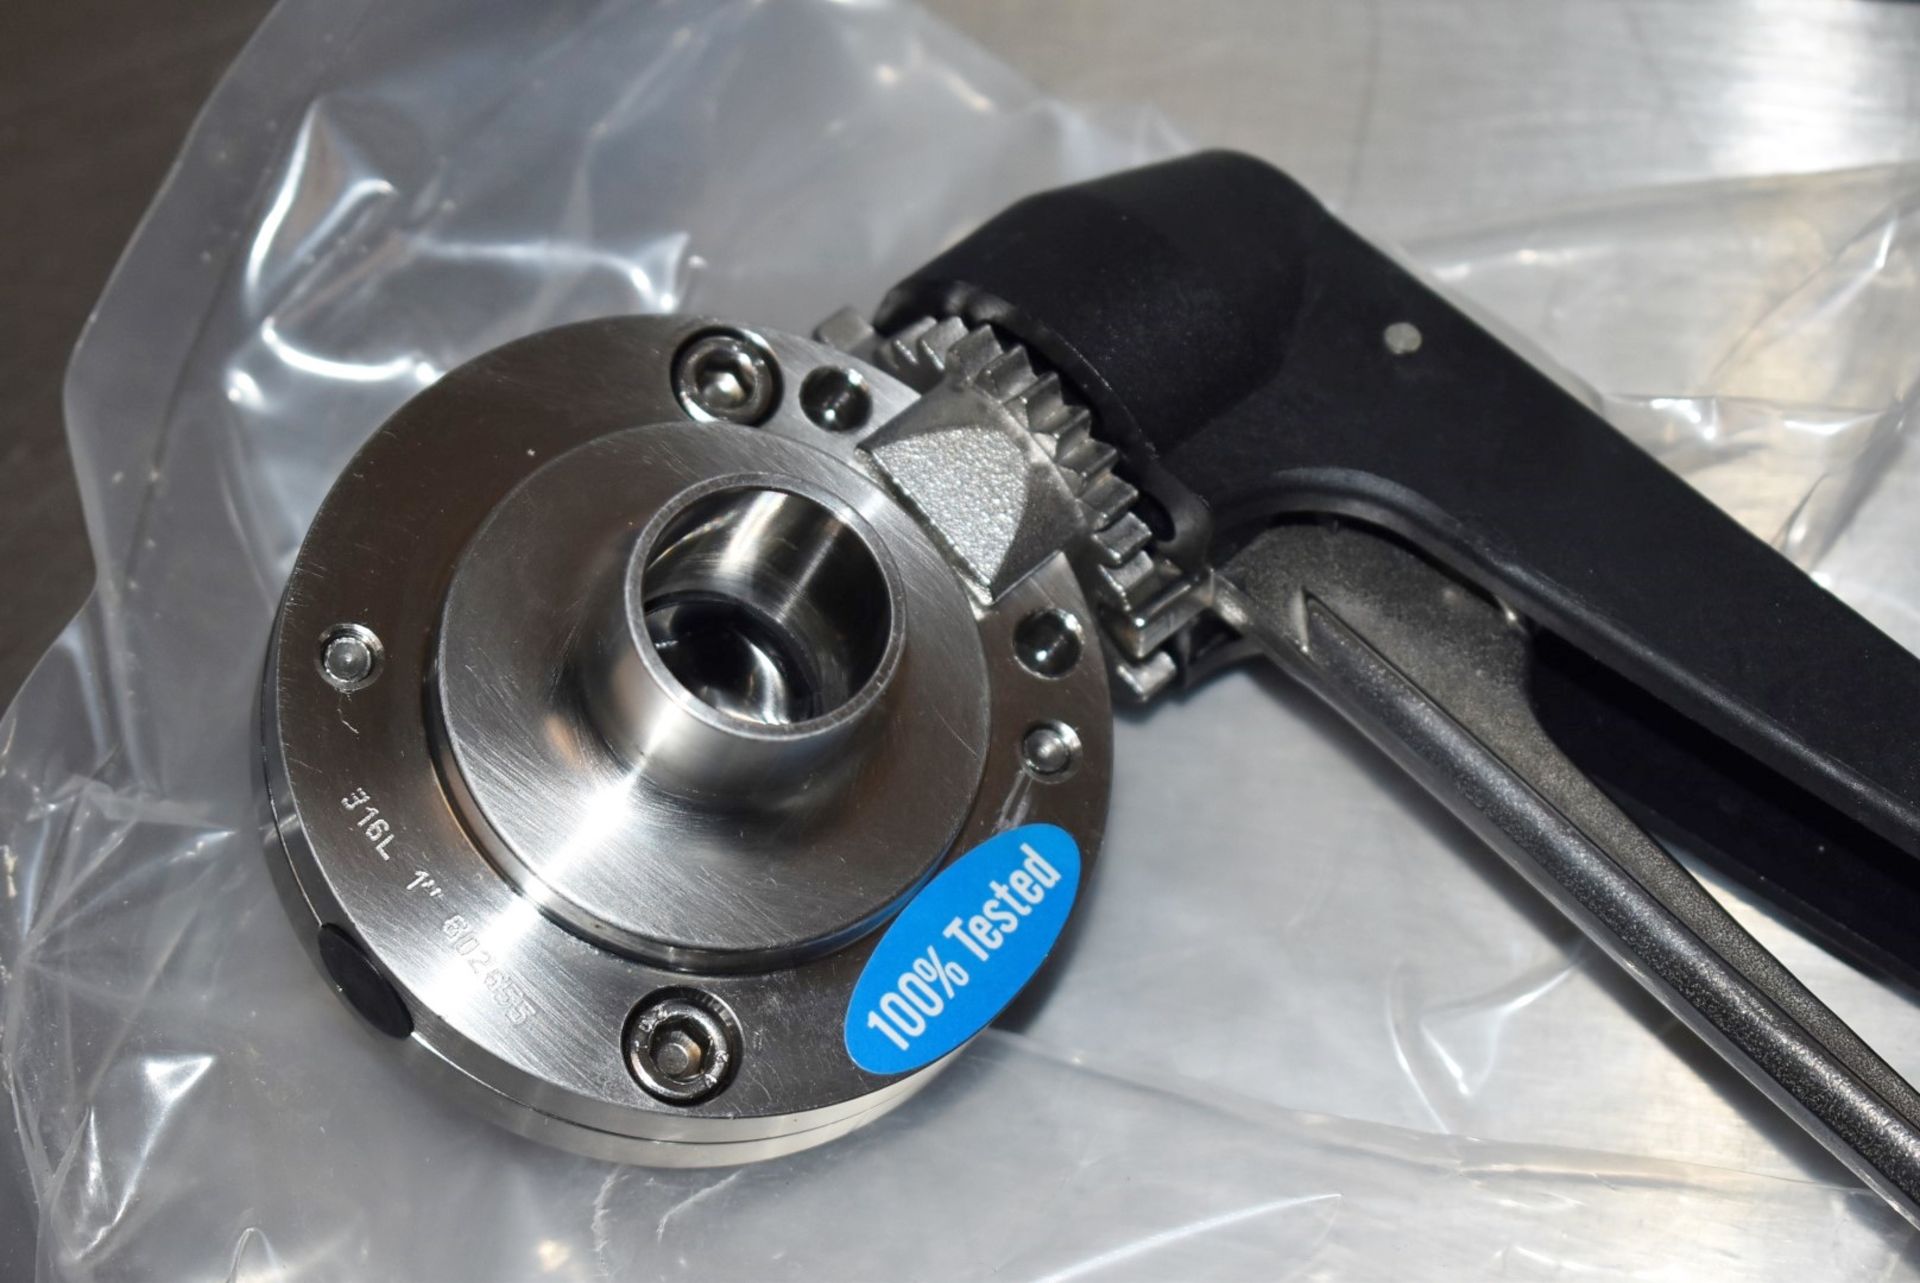 1 x Butterfly Valve - New in Original Box - Model: 3A - Material: 316L - Type: Weld - Size: 1 Inch - - Image 2 of 5